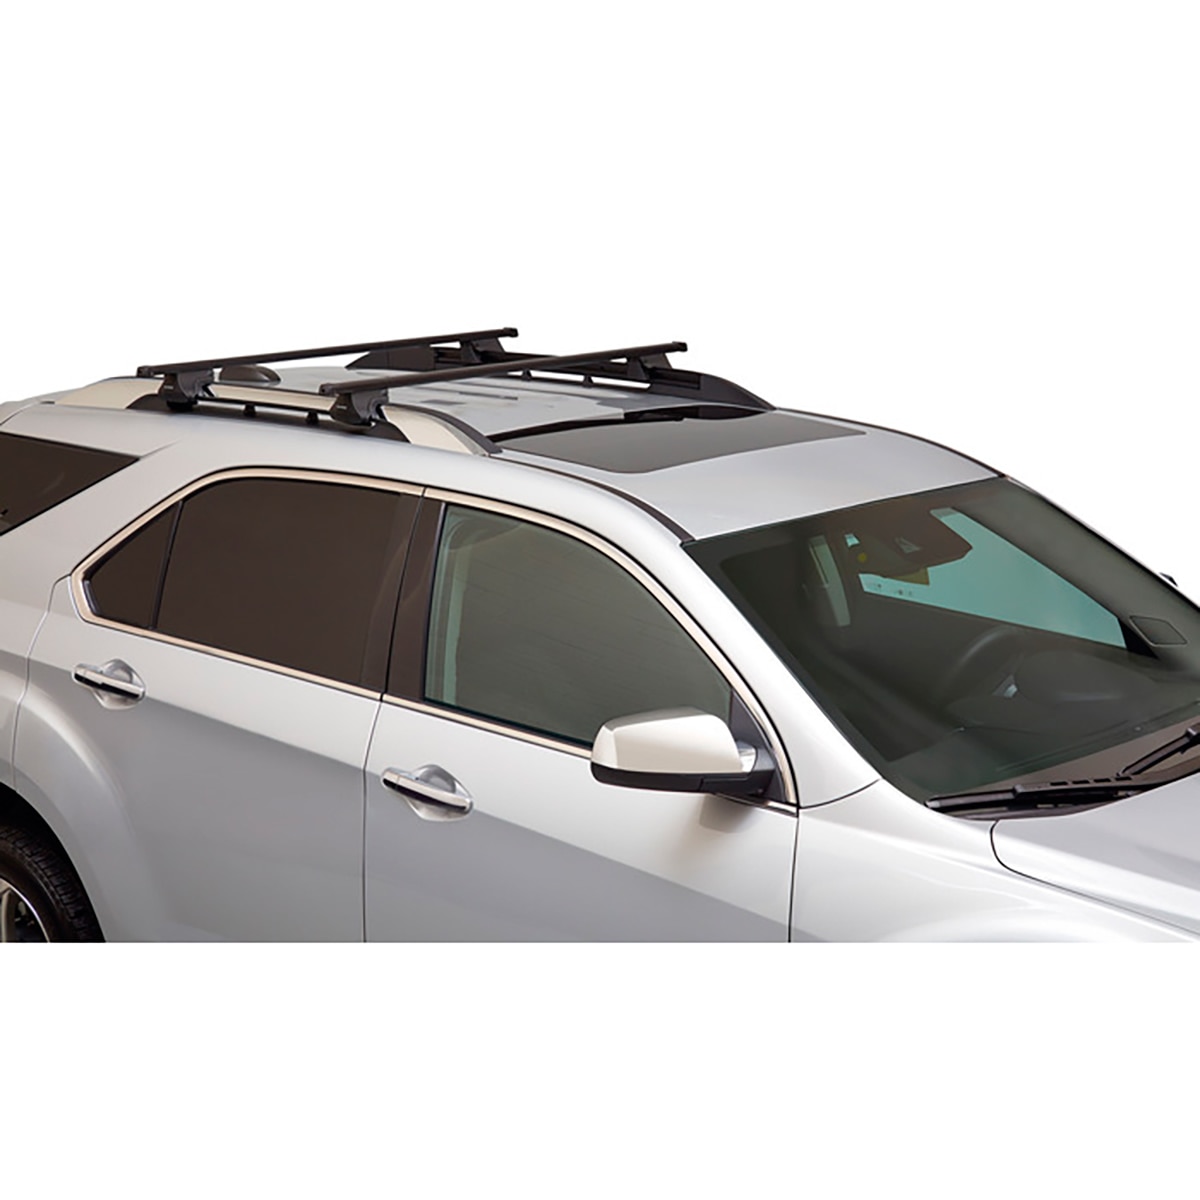 Sportrack, a brand of the Thule Group, barras universales transversales